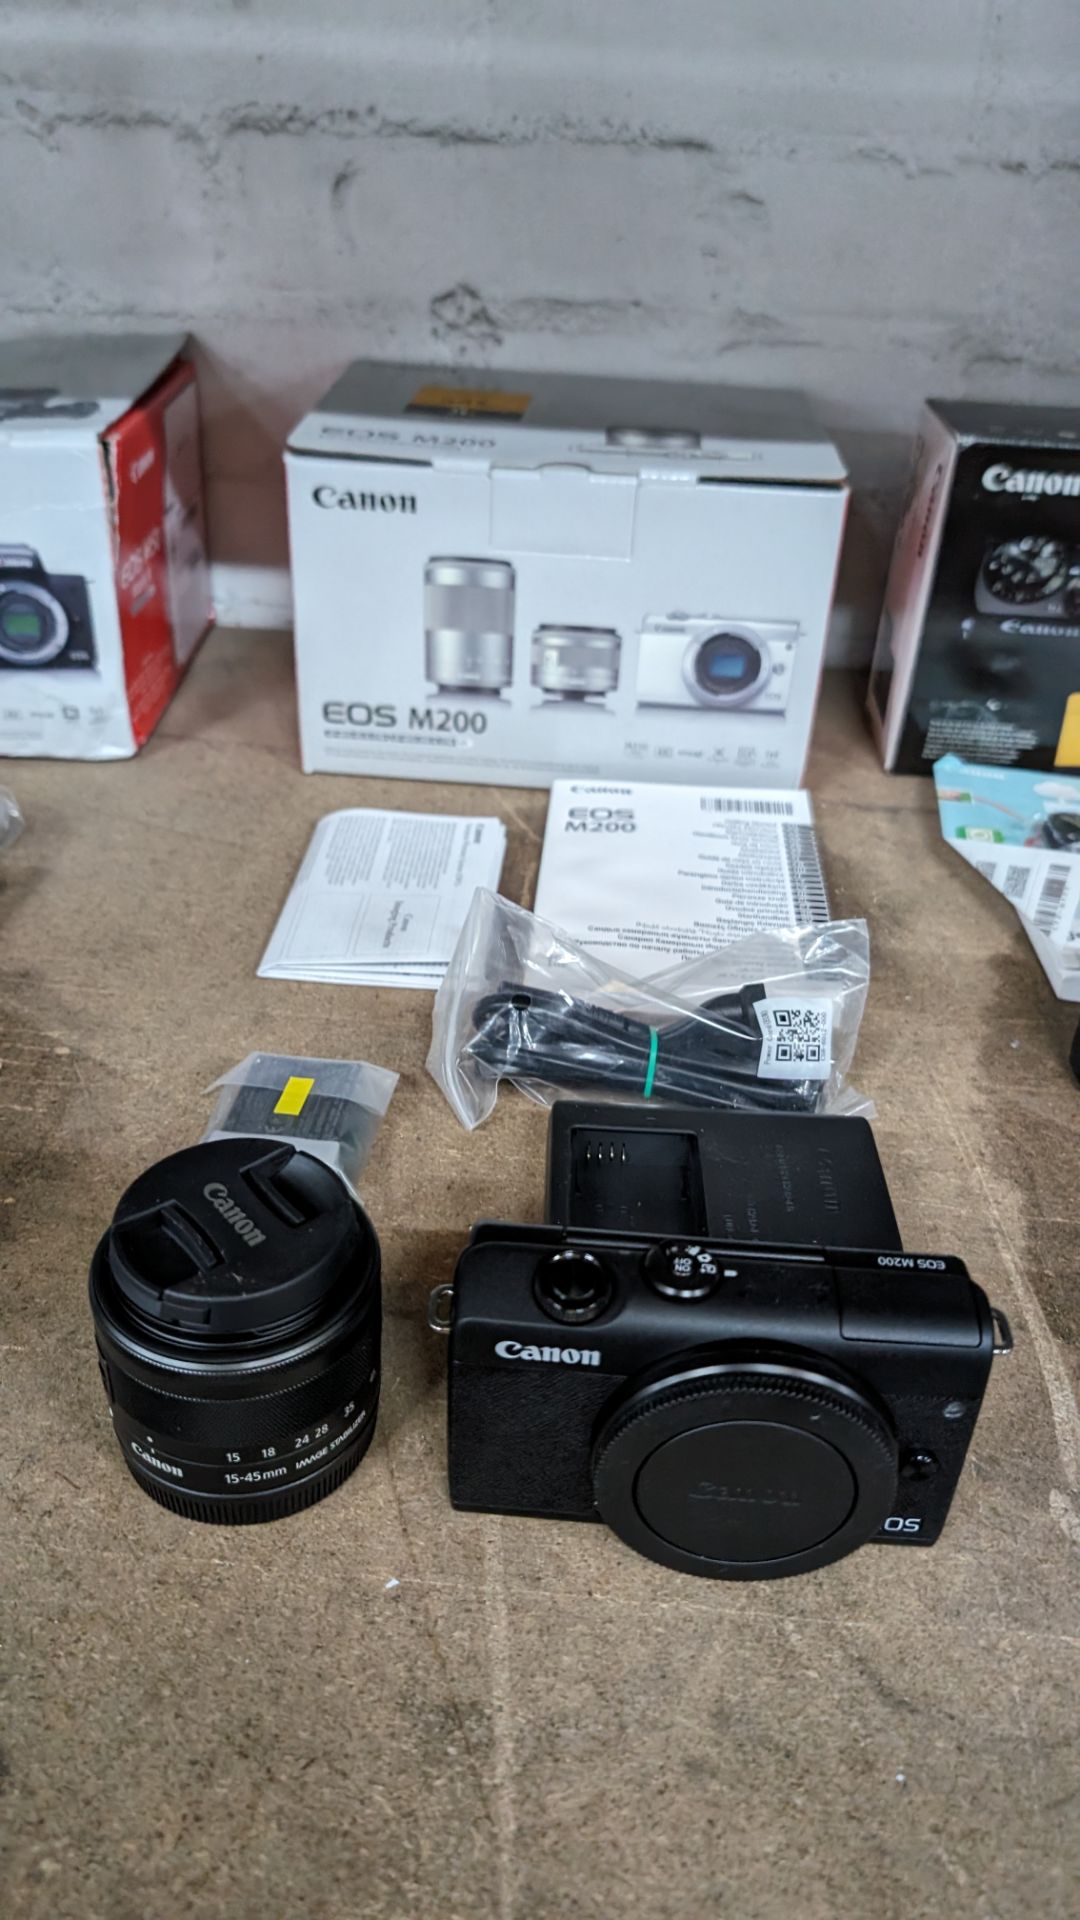 Canon EOS M200 camera kit, including 15-45mm image stabilizer lens, plus battery and charger - Bild 2 aus 12